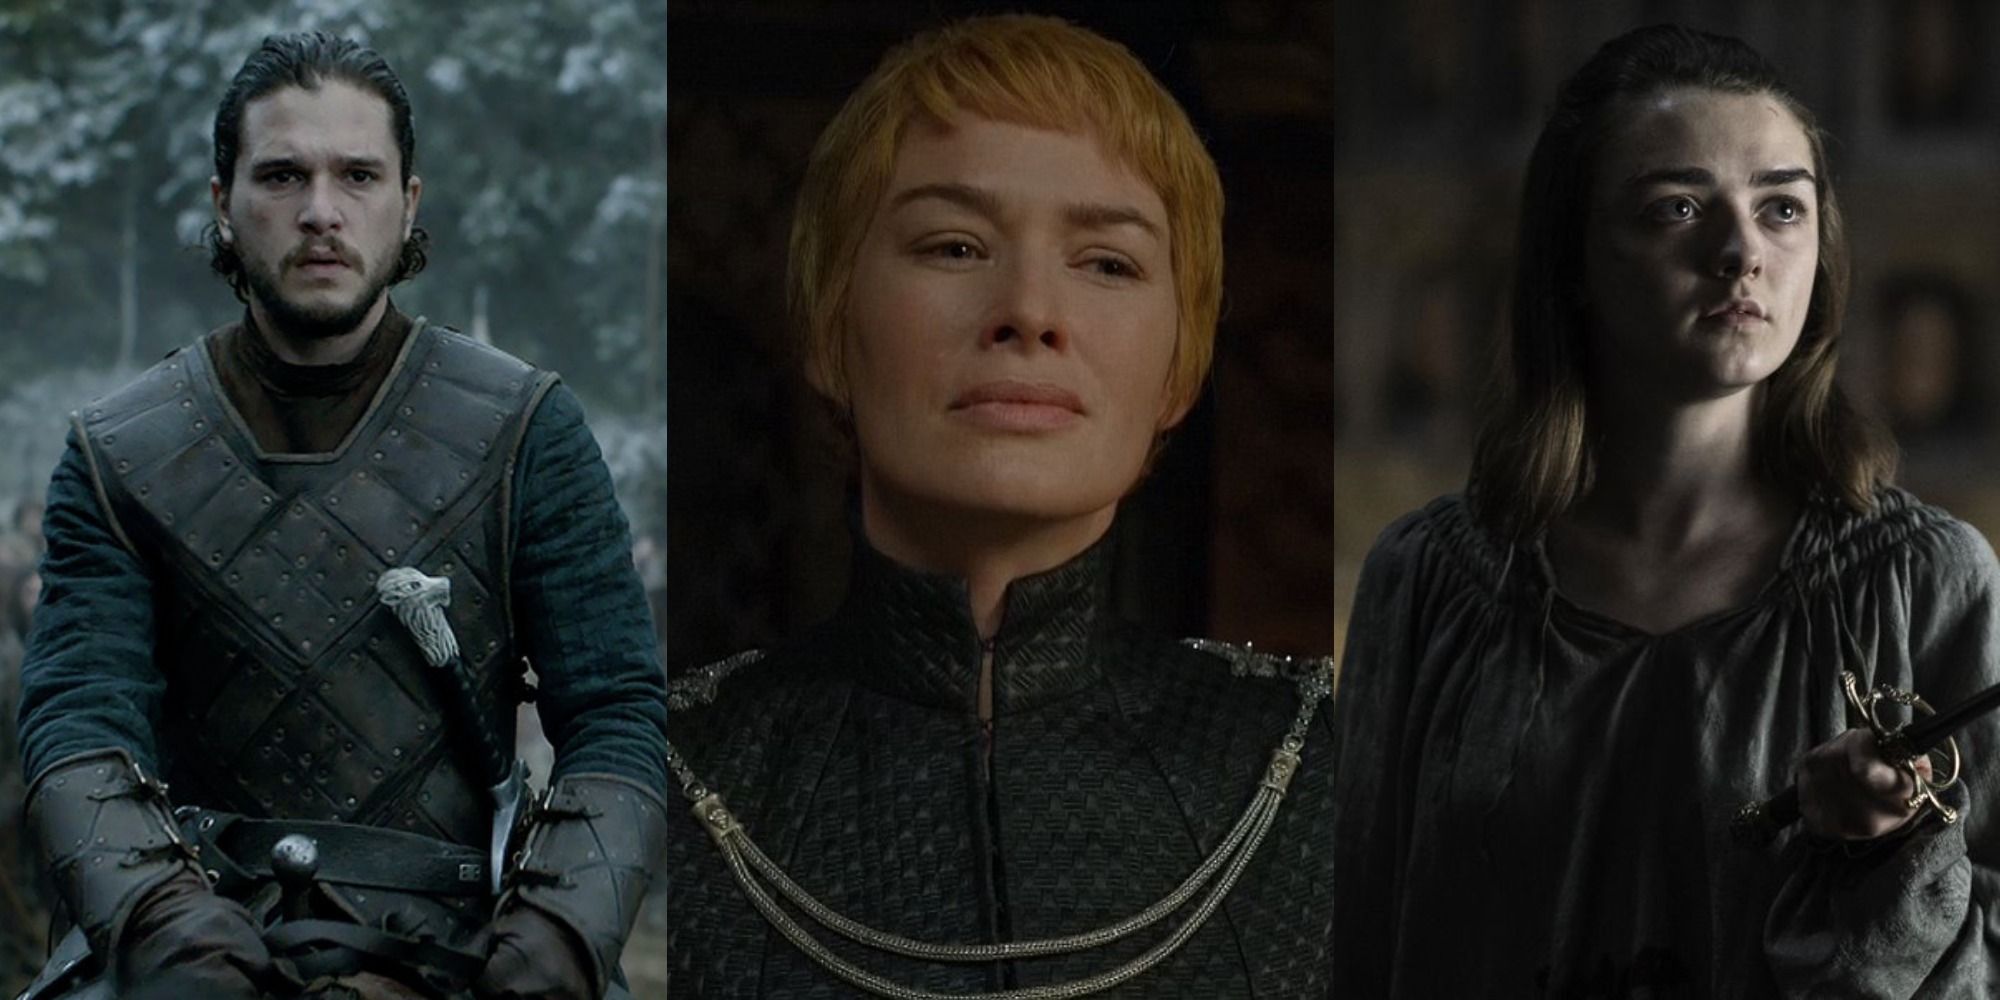 Split image depicting Jon Snow on a horse, Cersei Lannister smiling, and Arya Stark wielding Needle